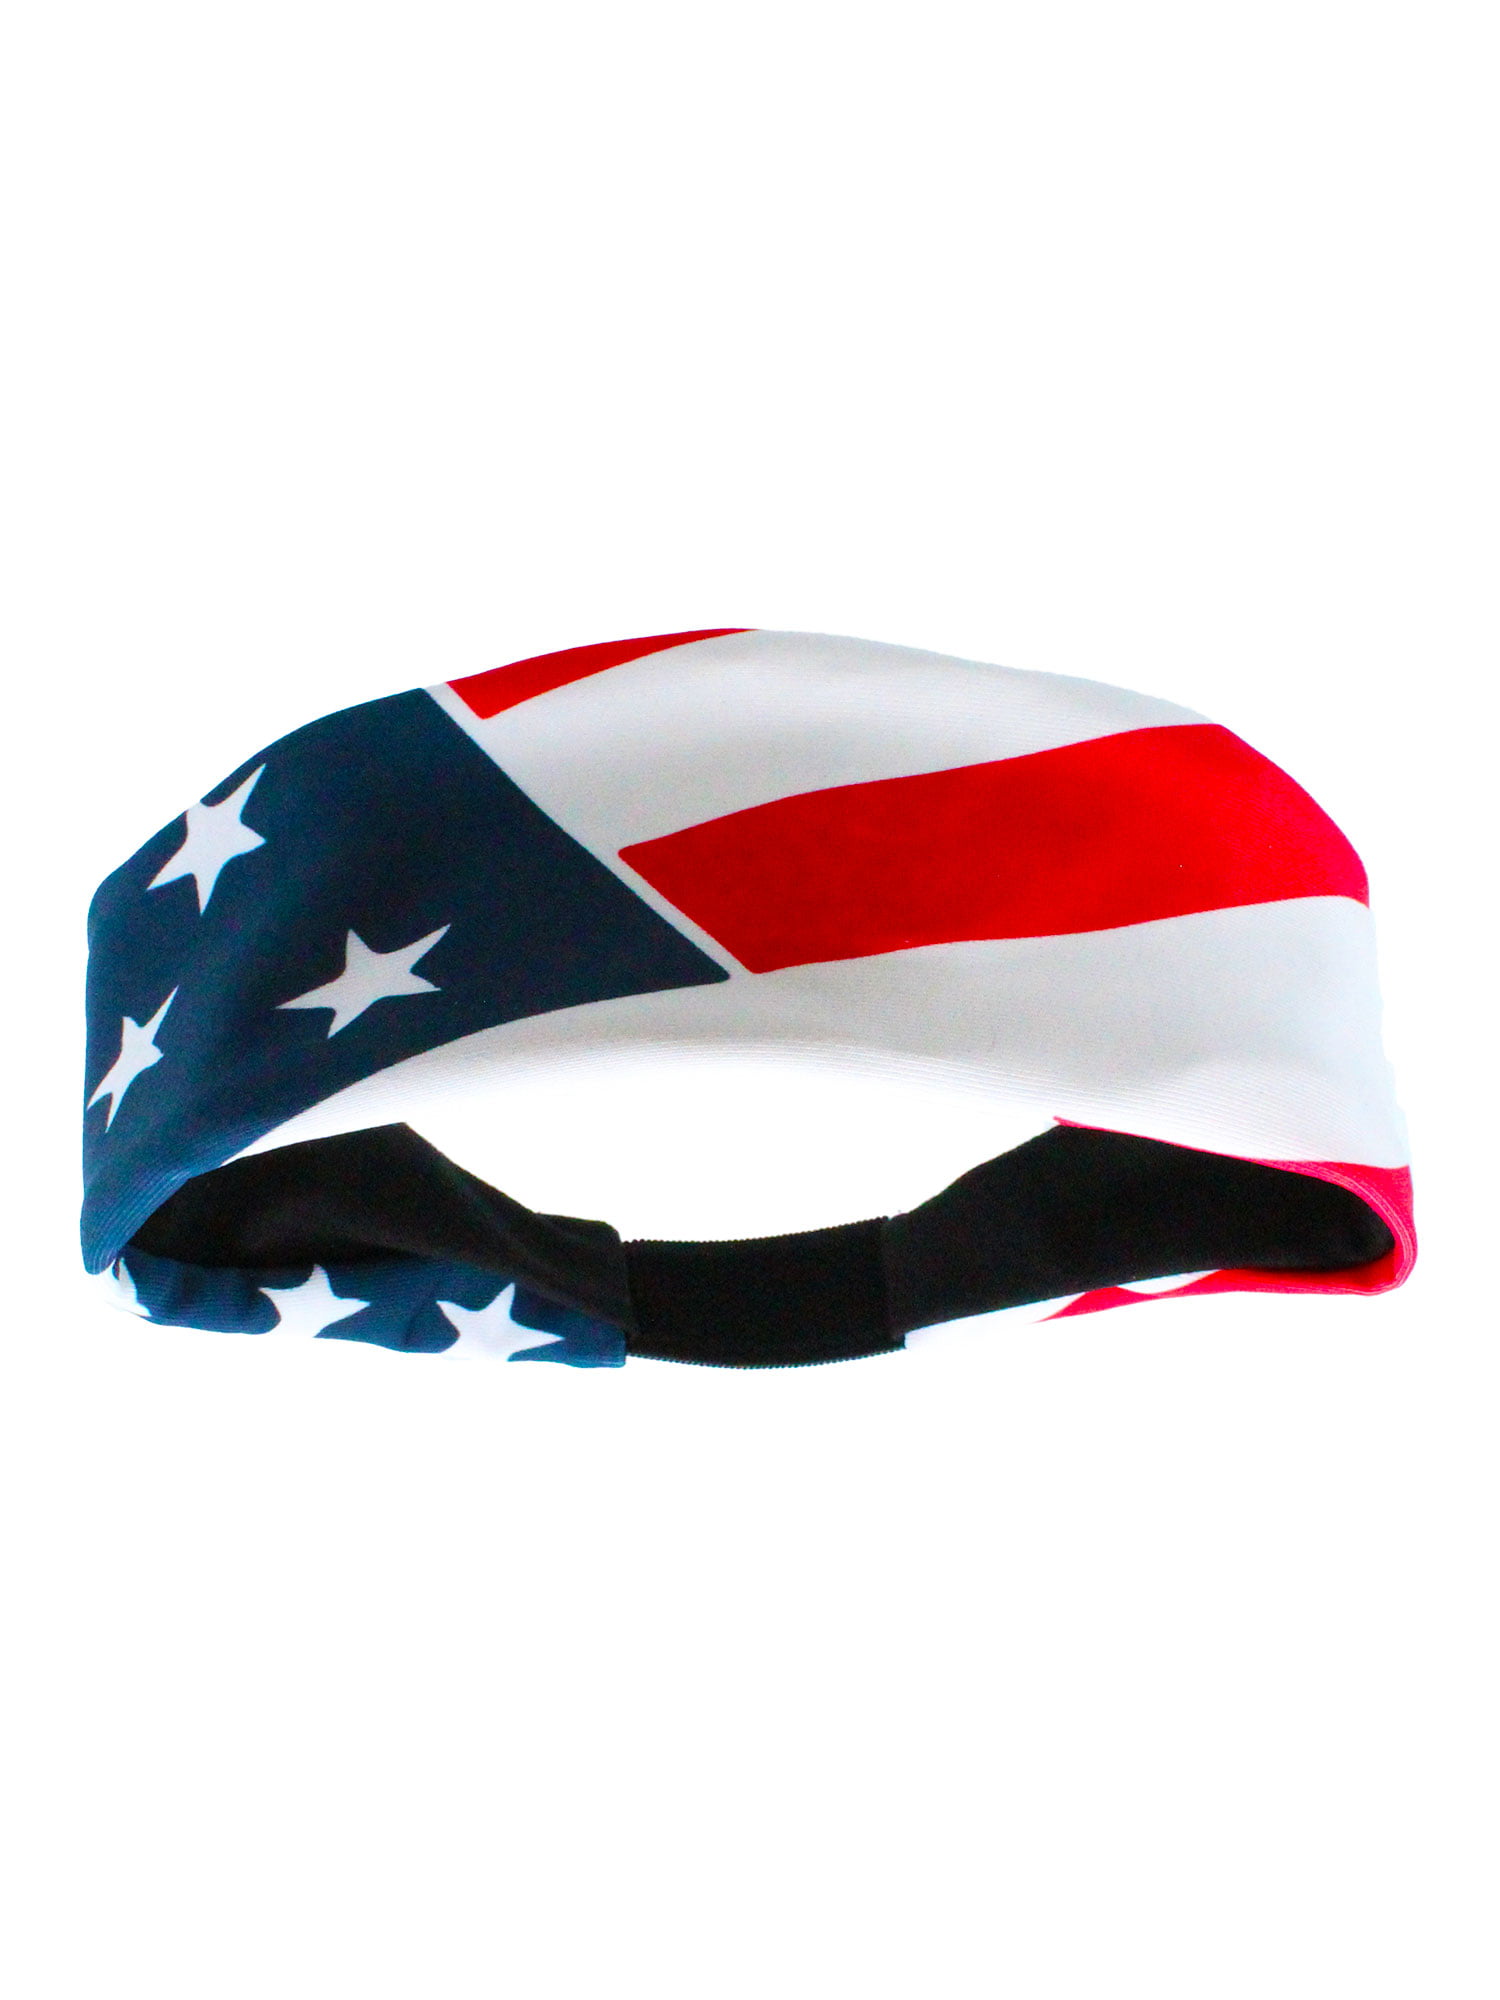 Gym Exercise Workout Cycling Running BLAISTER Stranger Things Headbands American Flag Hair Band Red White and Blue Patriotic USA Stars and Stripes Head Bands Stretch Sports Sweatbands for Yoga 